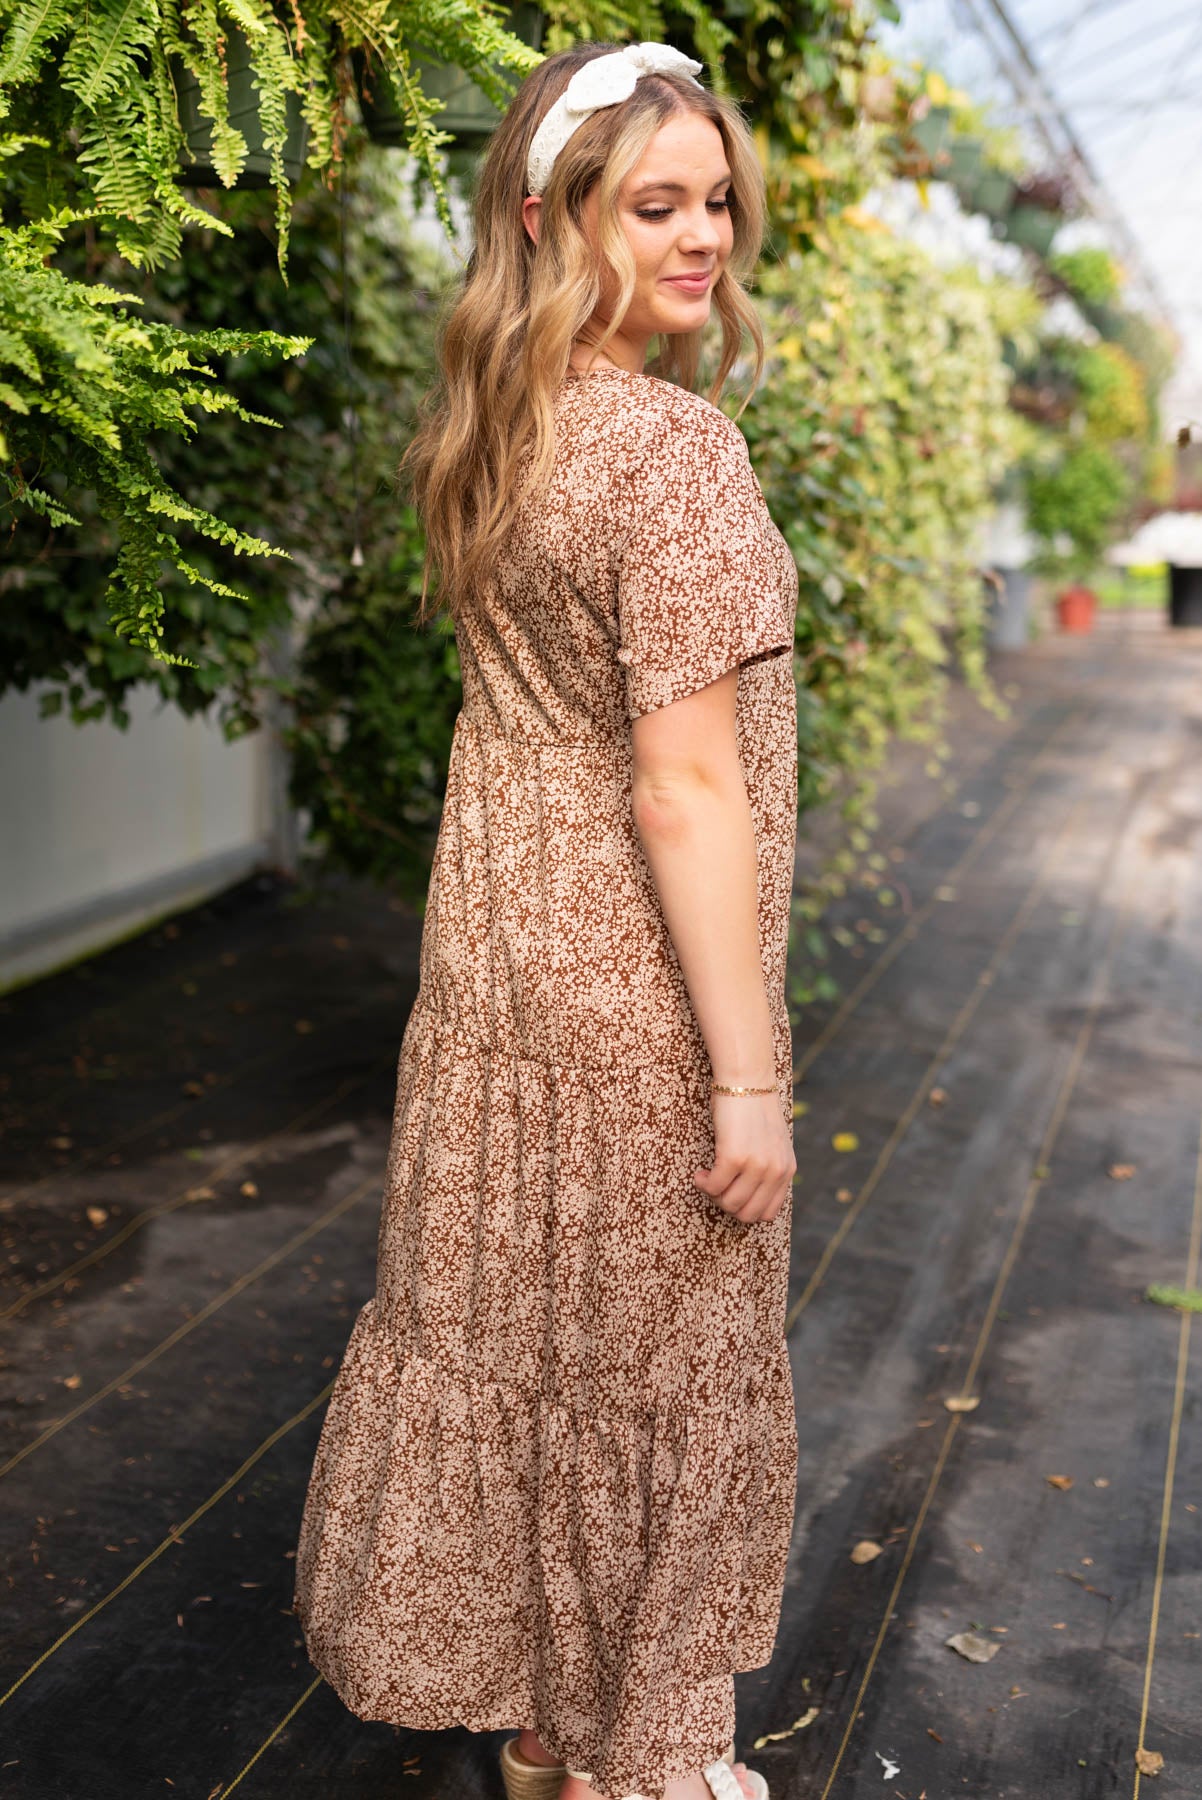 Side view of the brown floral dress